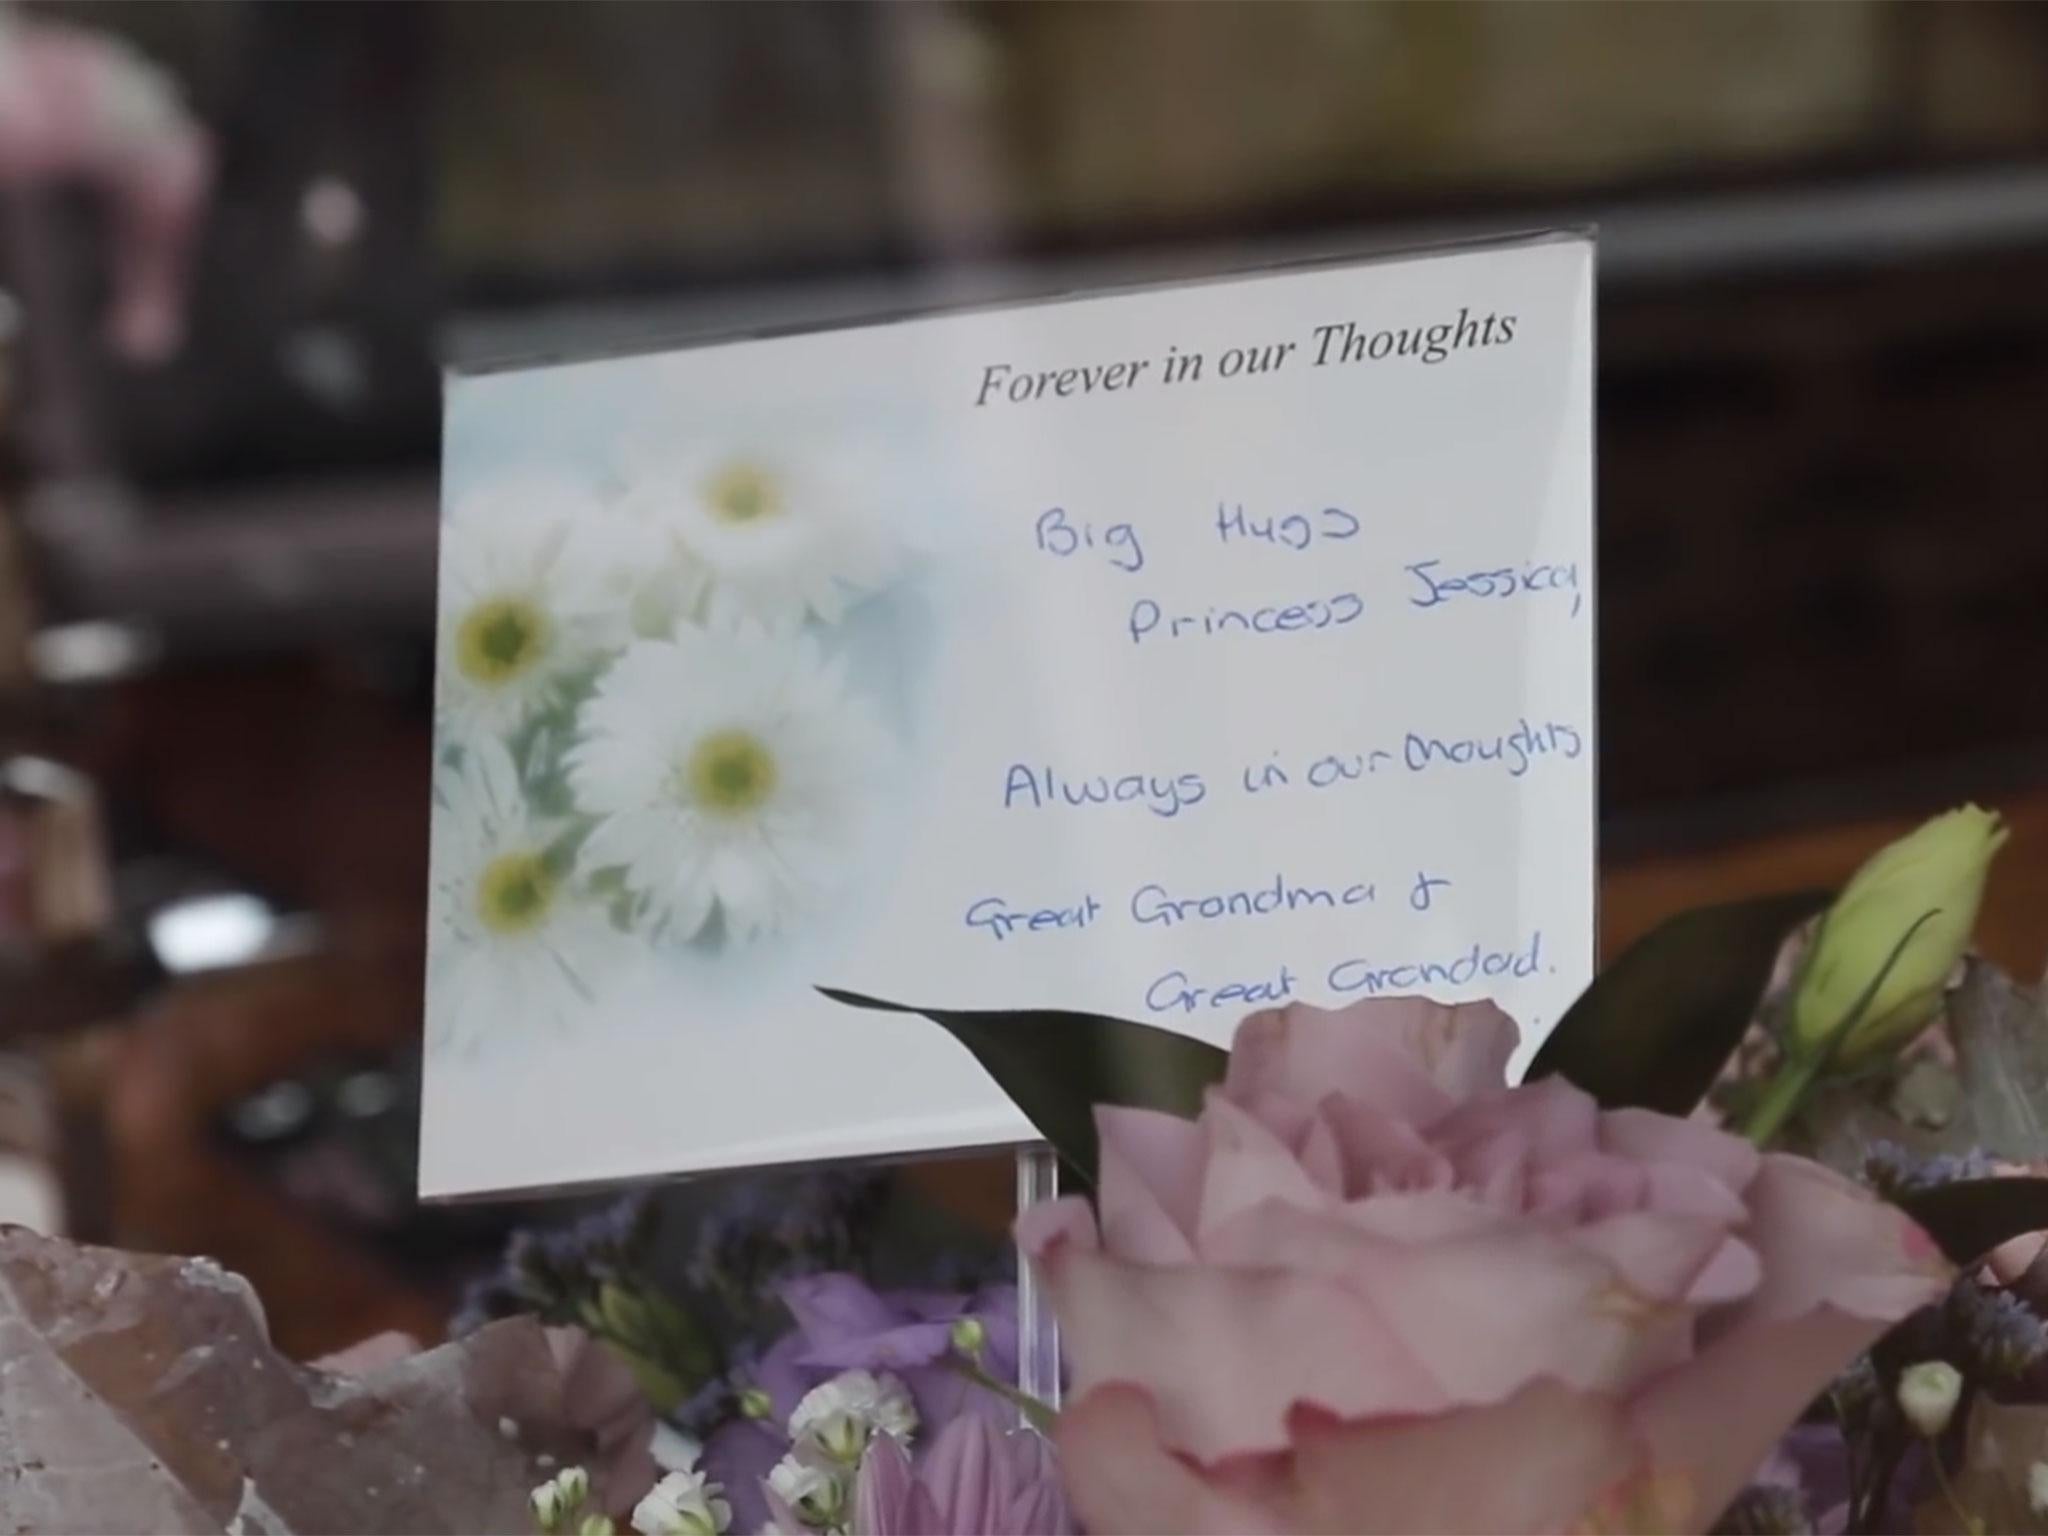 A note from Jessica's family left on her funeral flowers